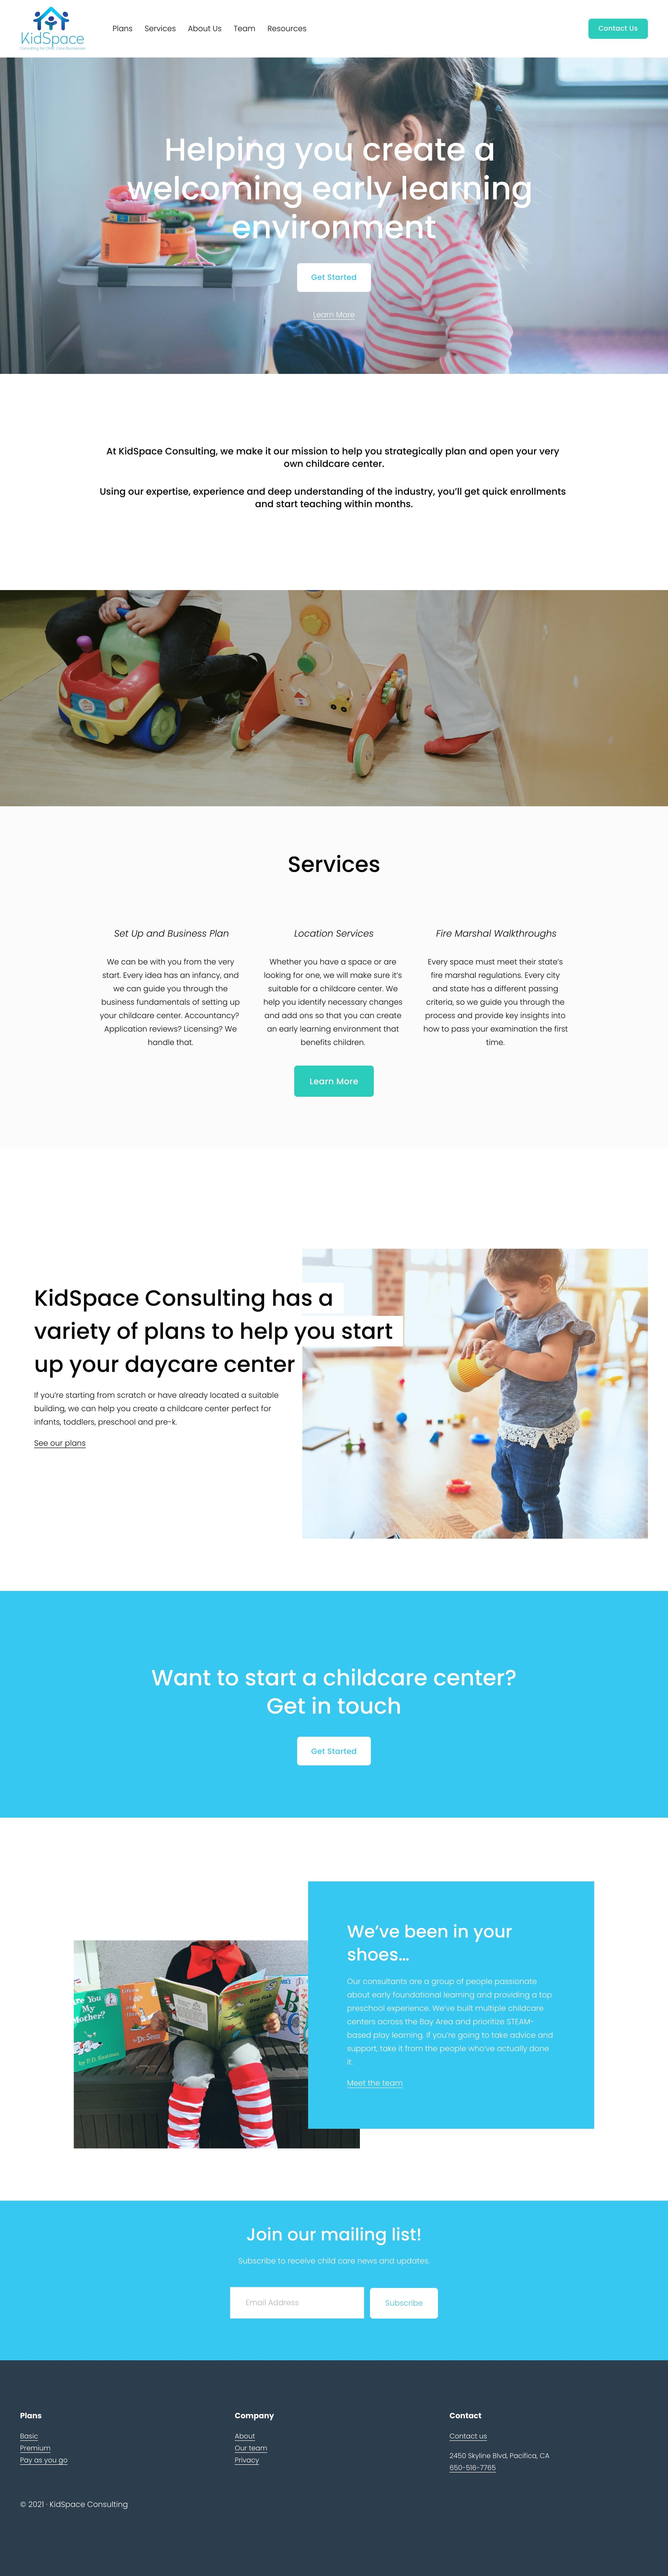 Kidspace consulting